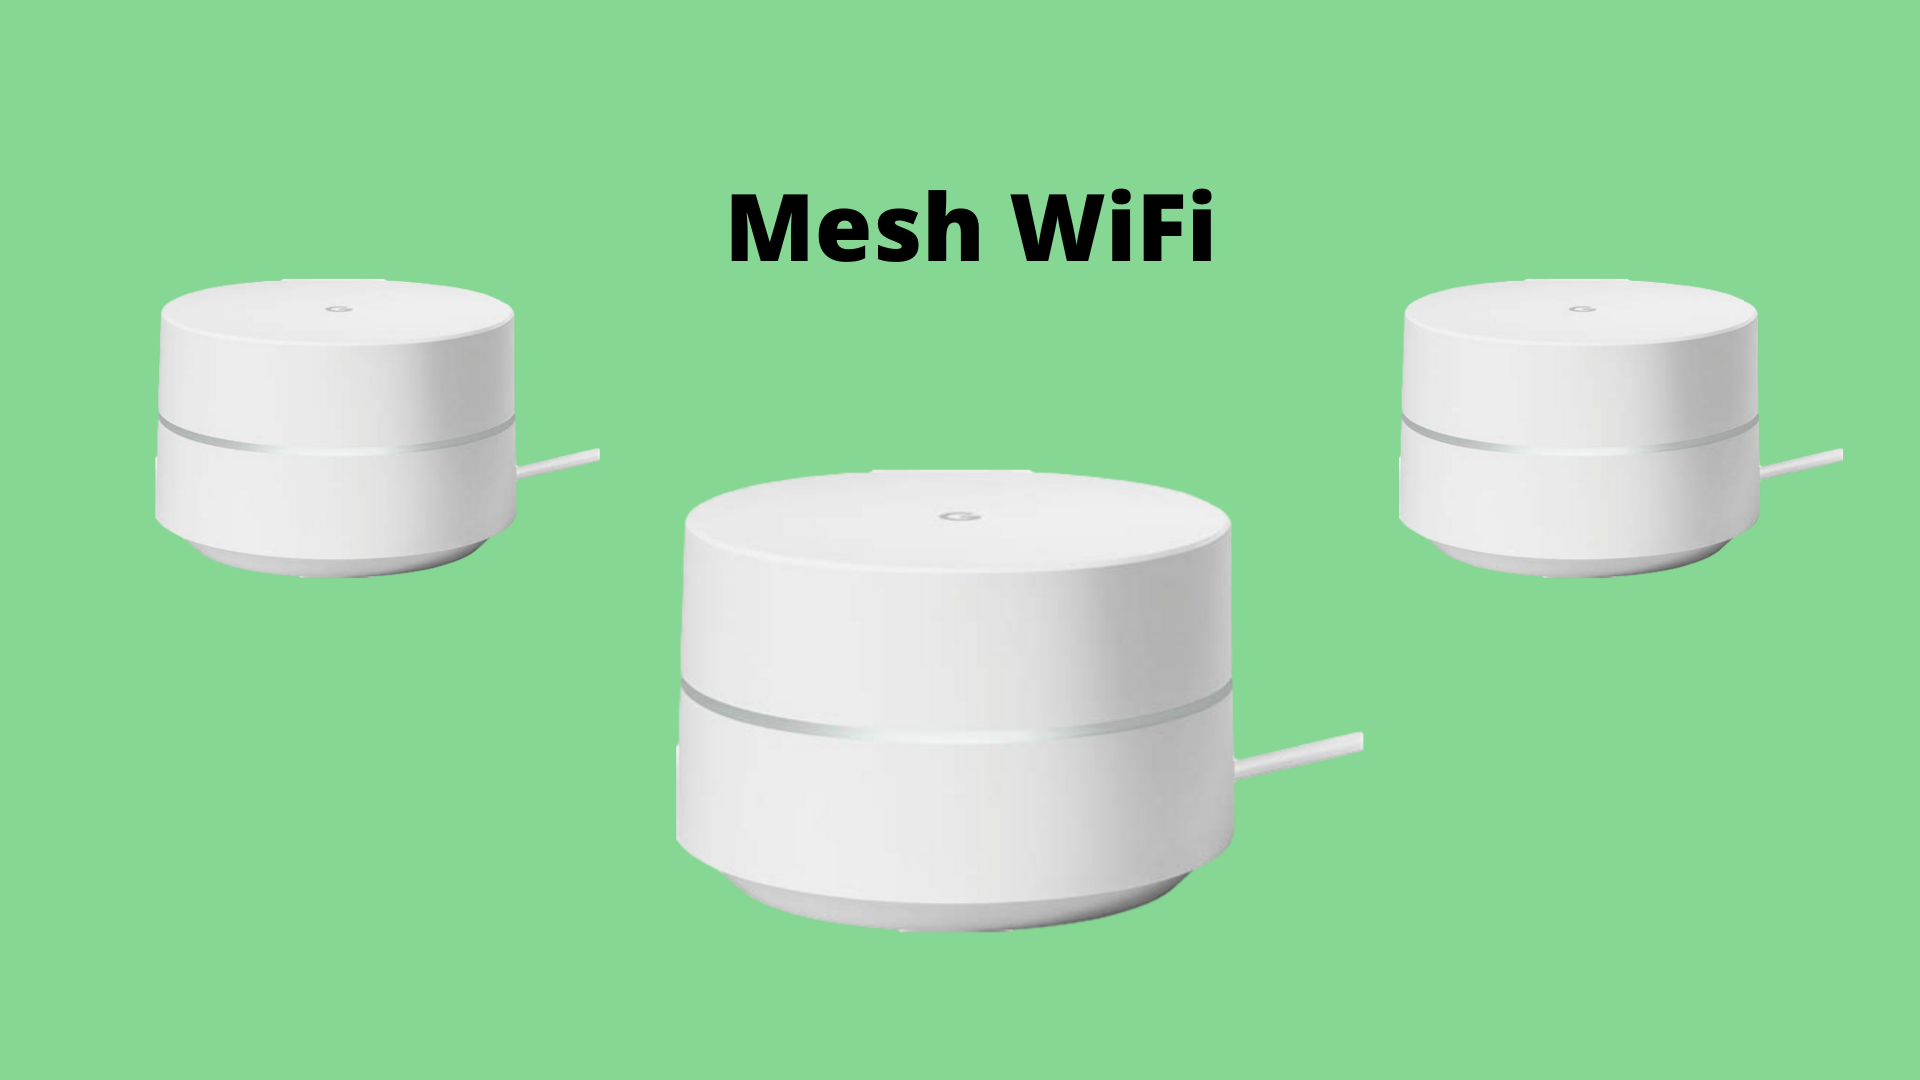 increase your internet speed with a mesh wi-fi system